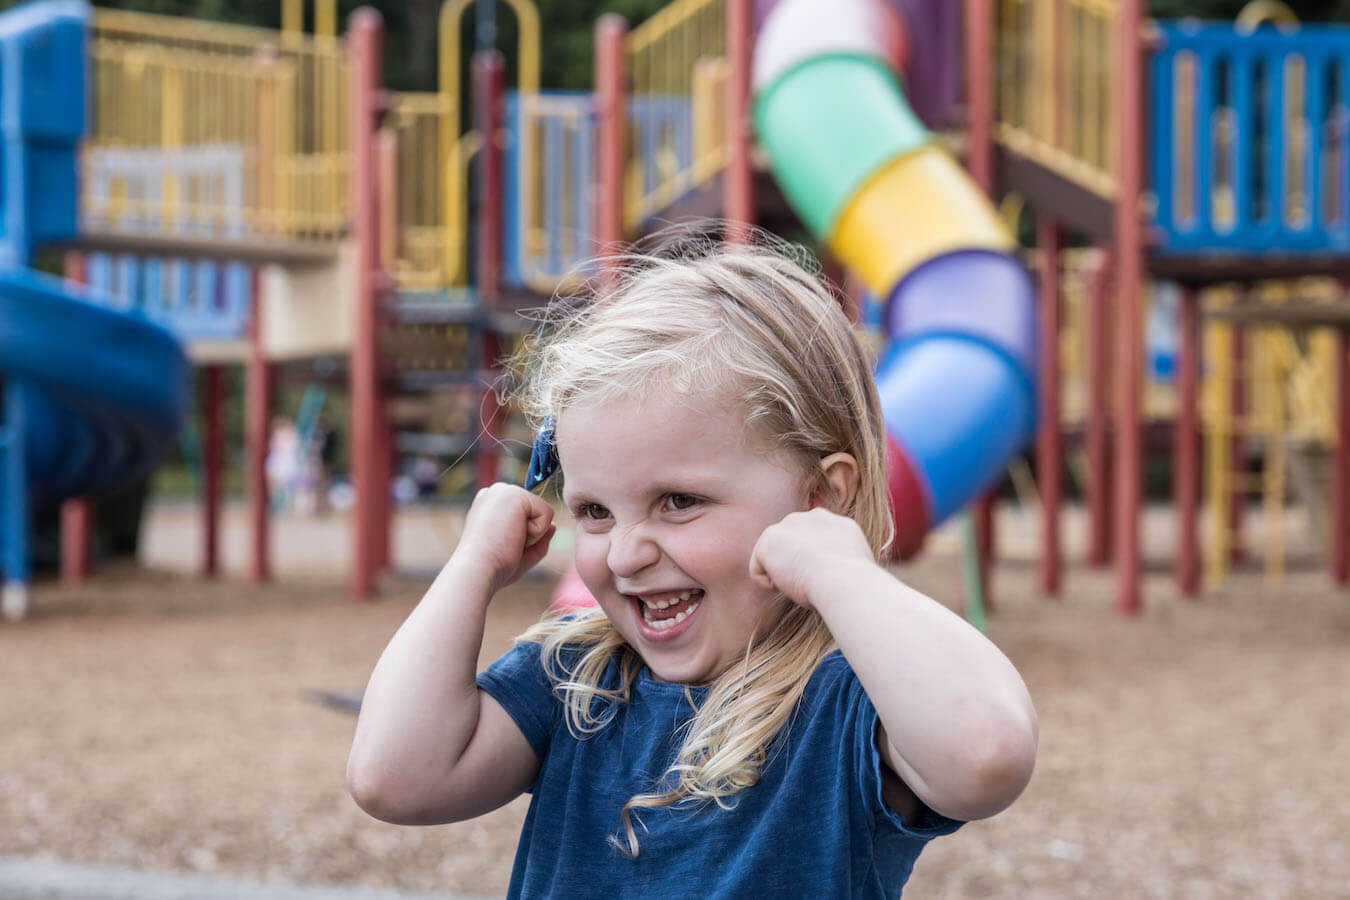 An excited young girl at an outdoor playground